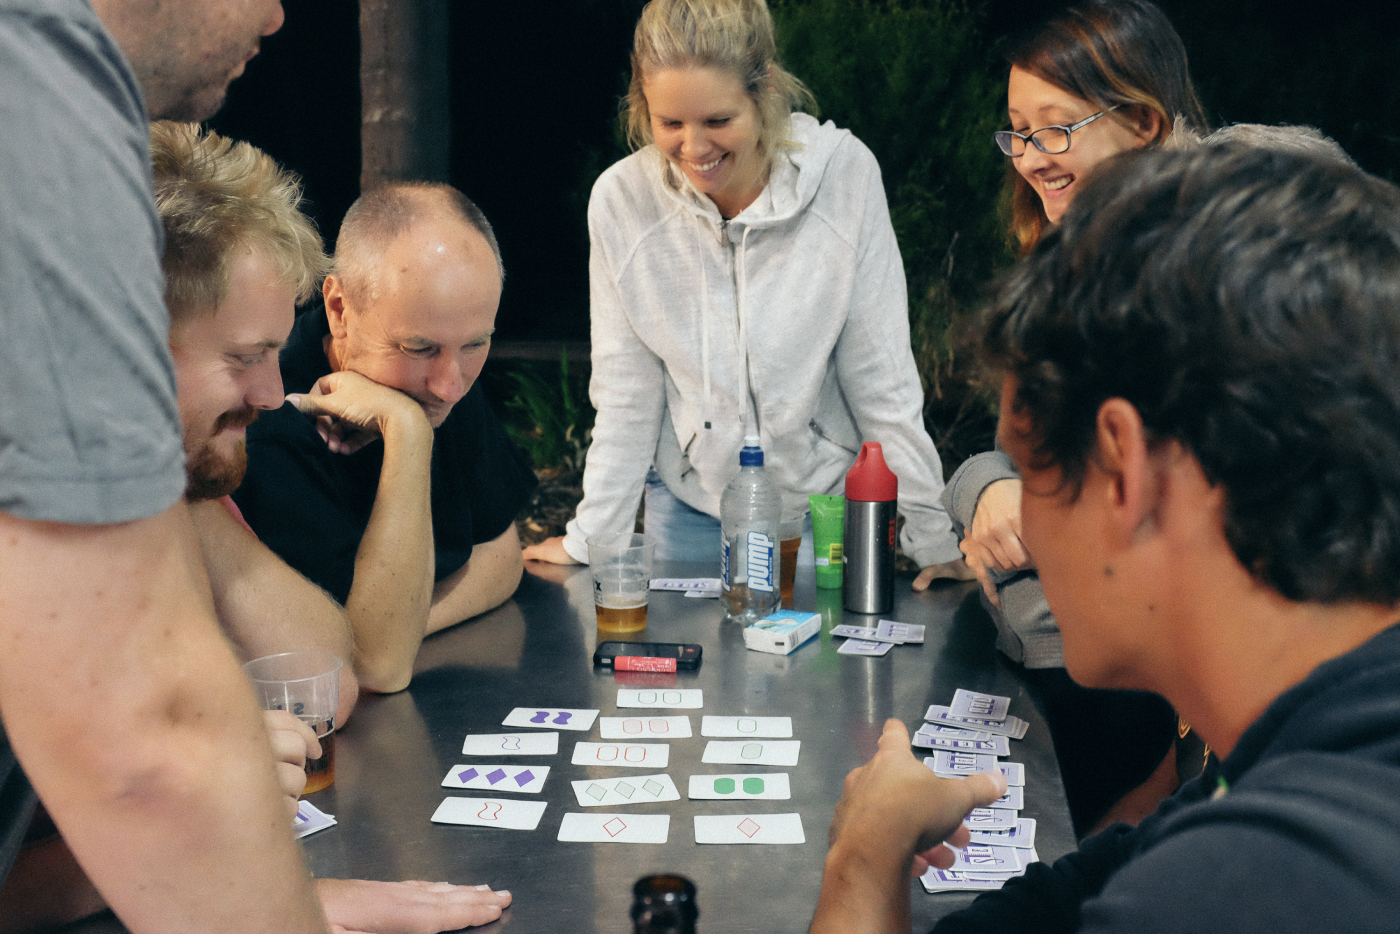 A group of people playing card games